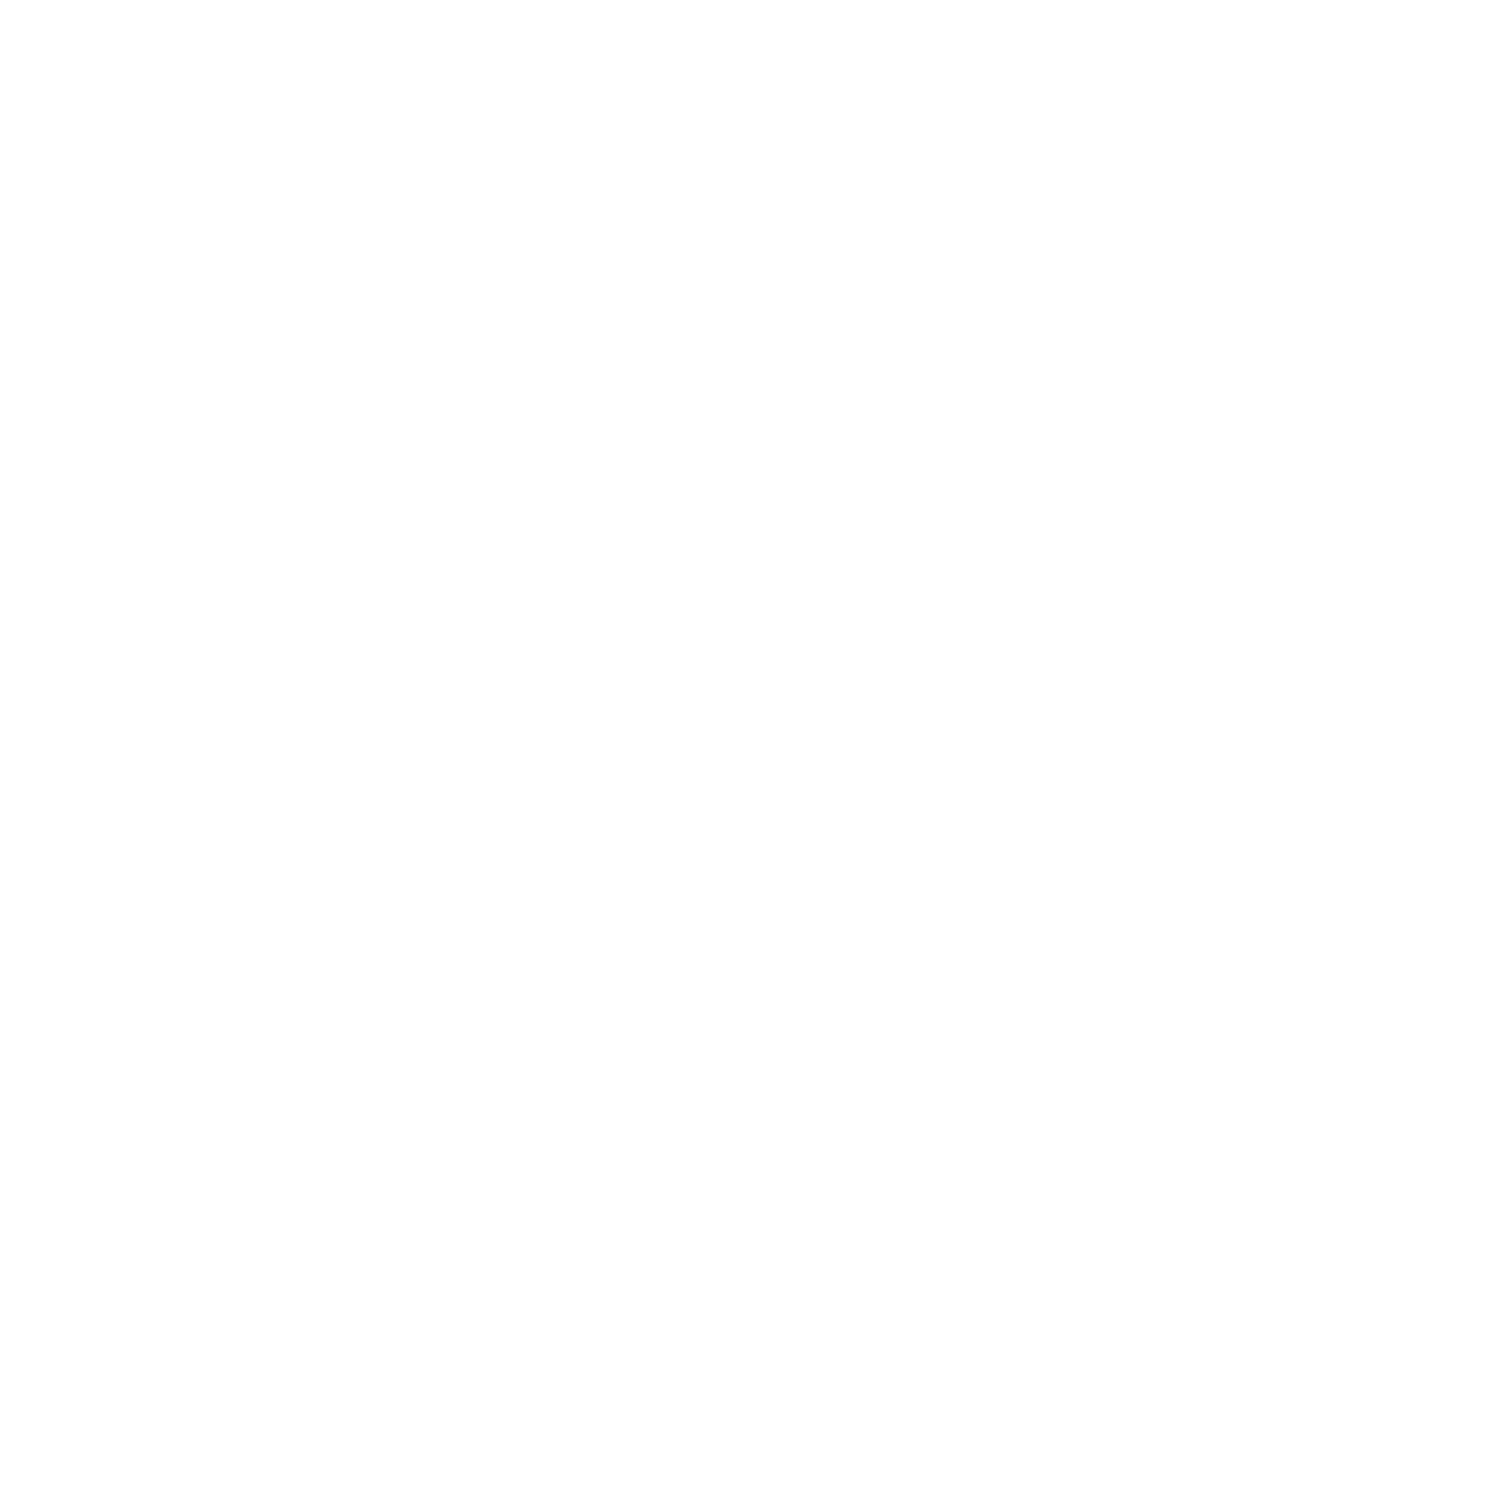 Blue Line Roofing